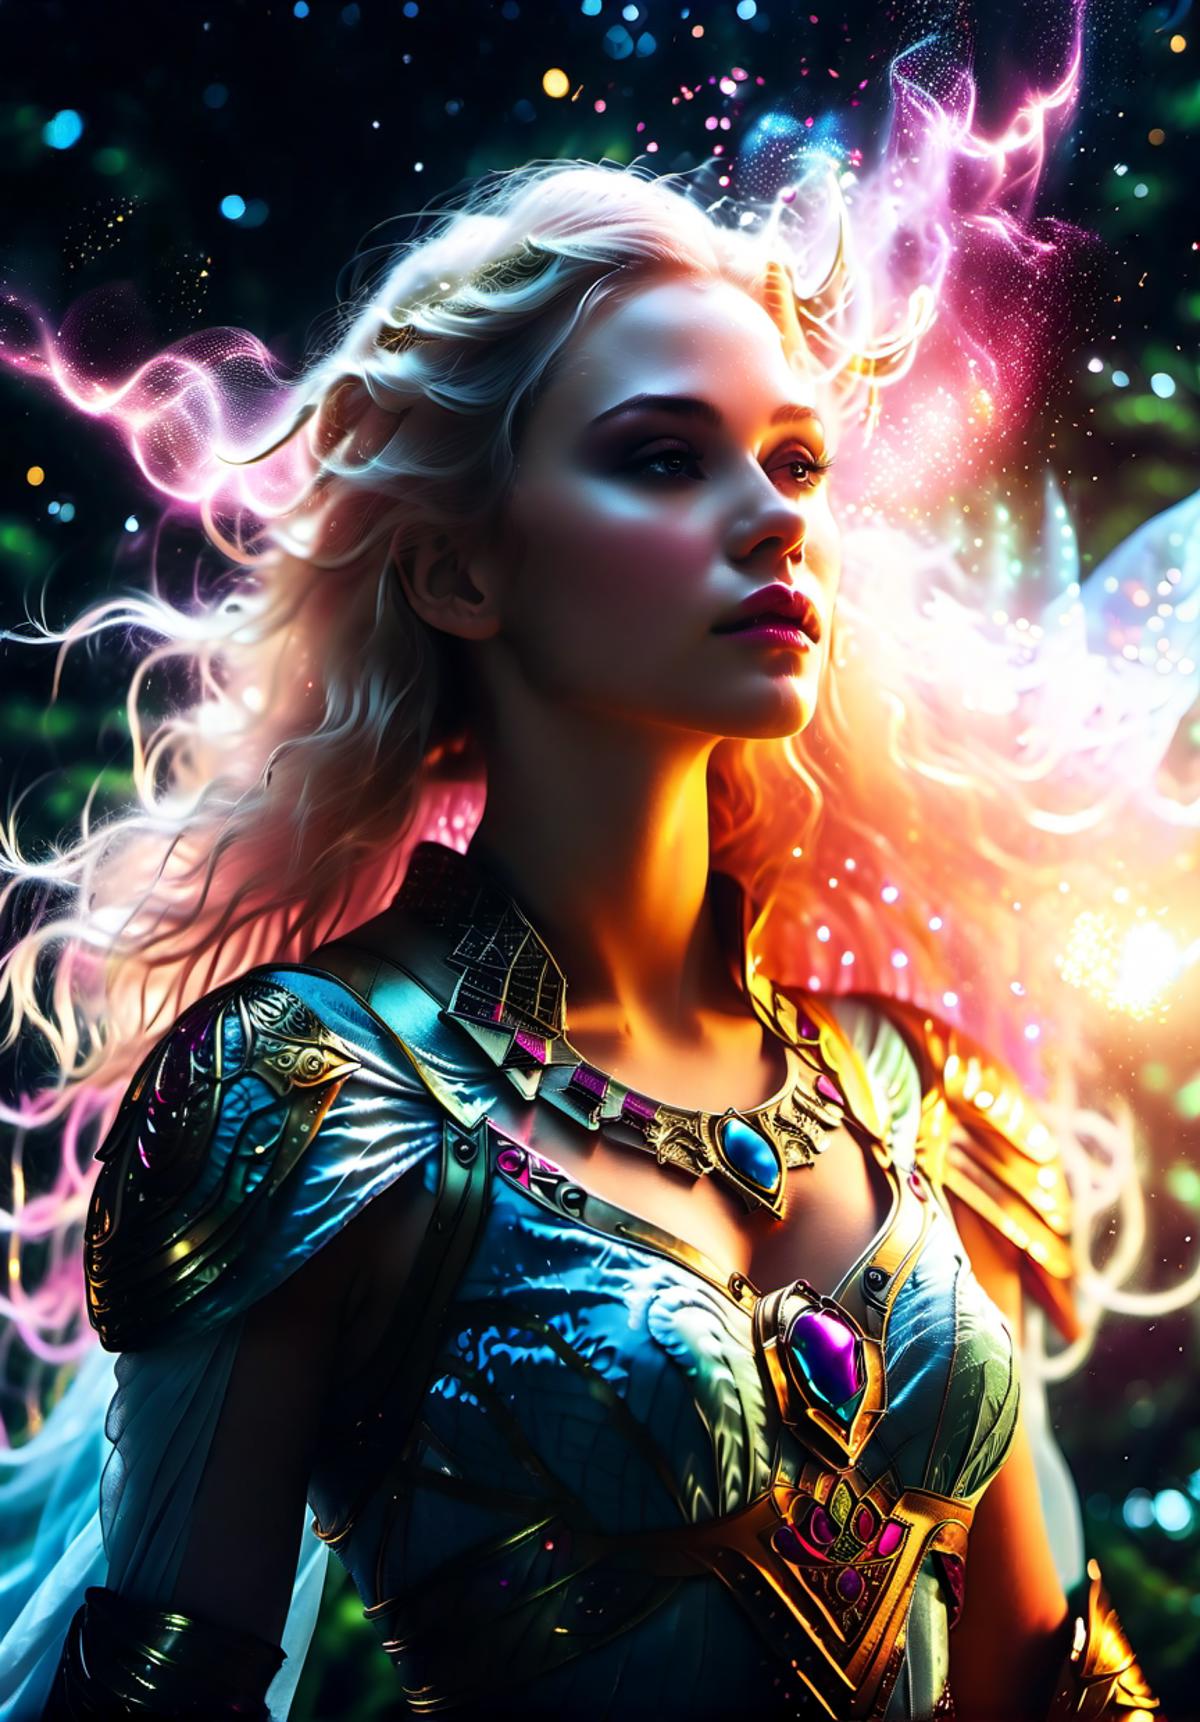 A Fantasy Art Illustration of a Woman with Blond Hair and a Necklace.